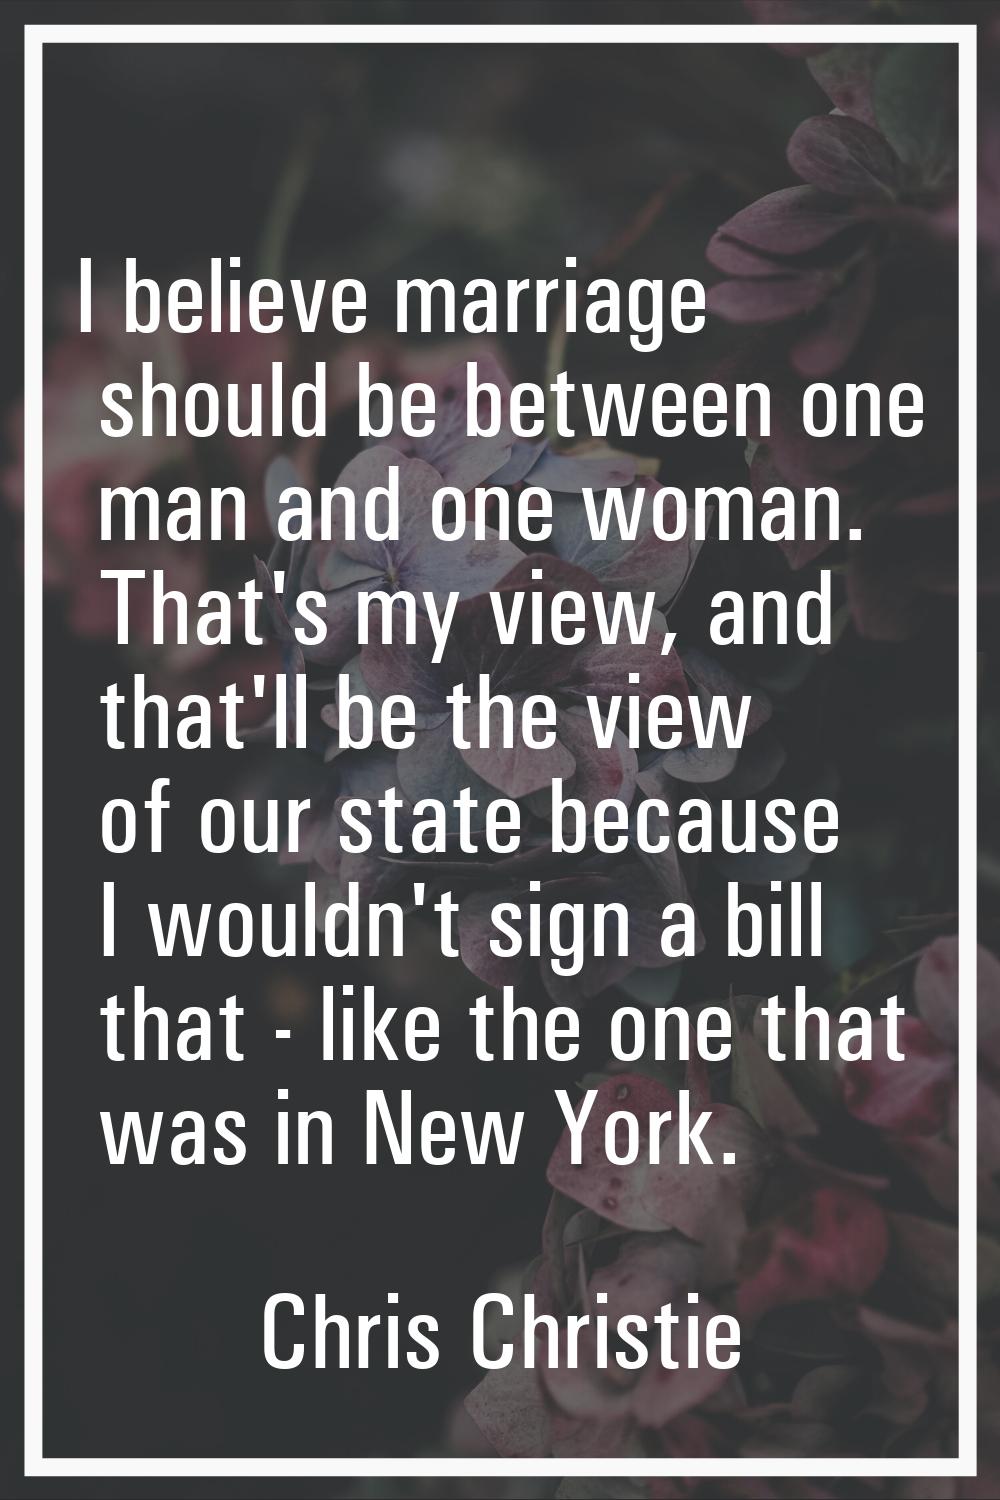 I believe marriage should be between one man and one woman. That's my view, and that'll be the view